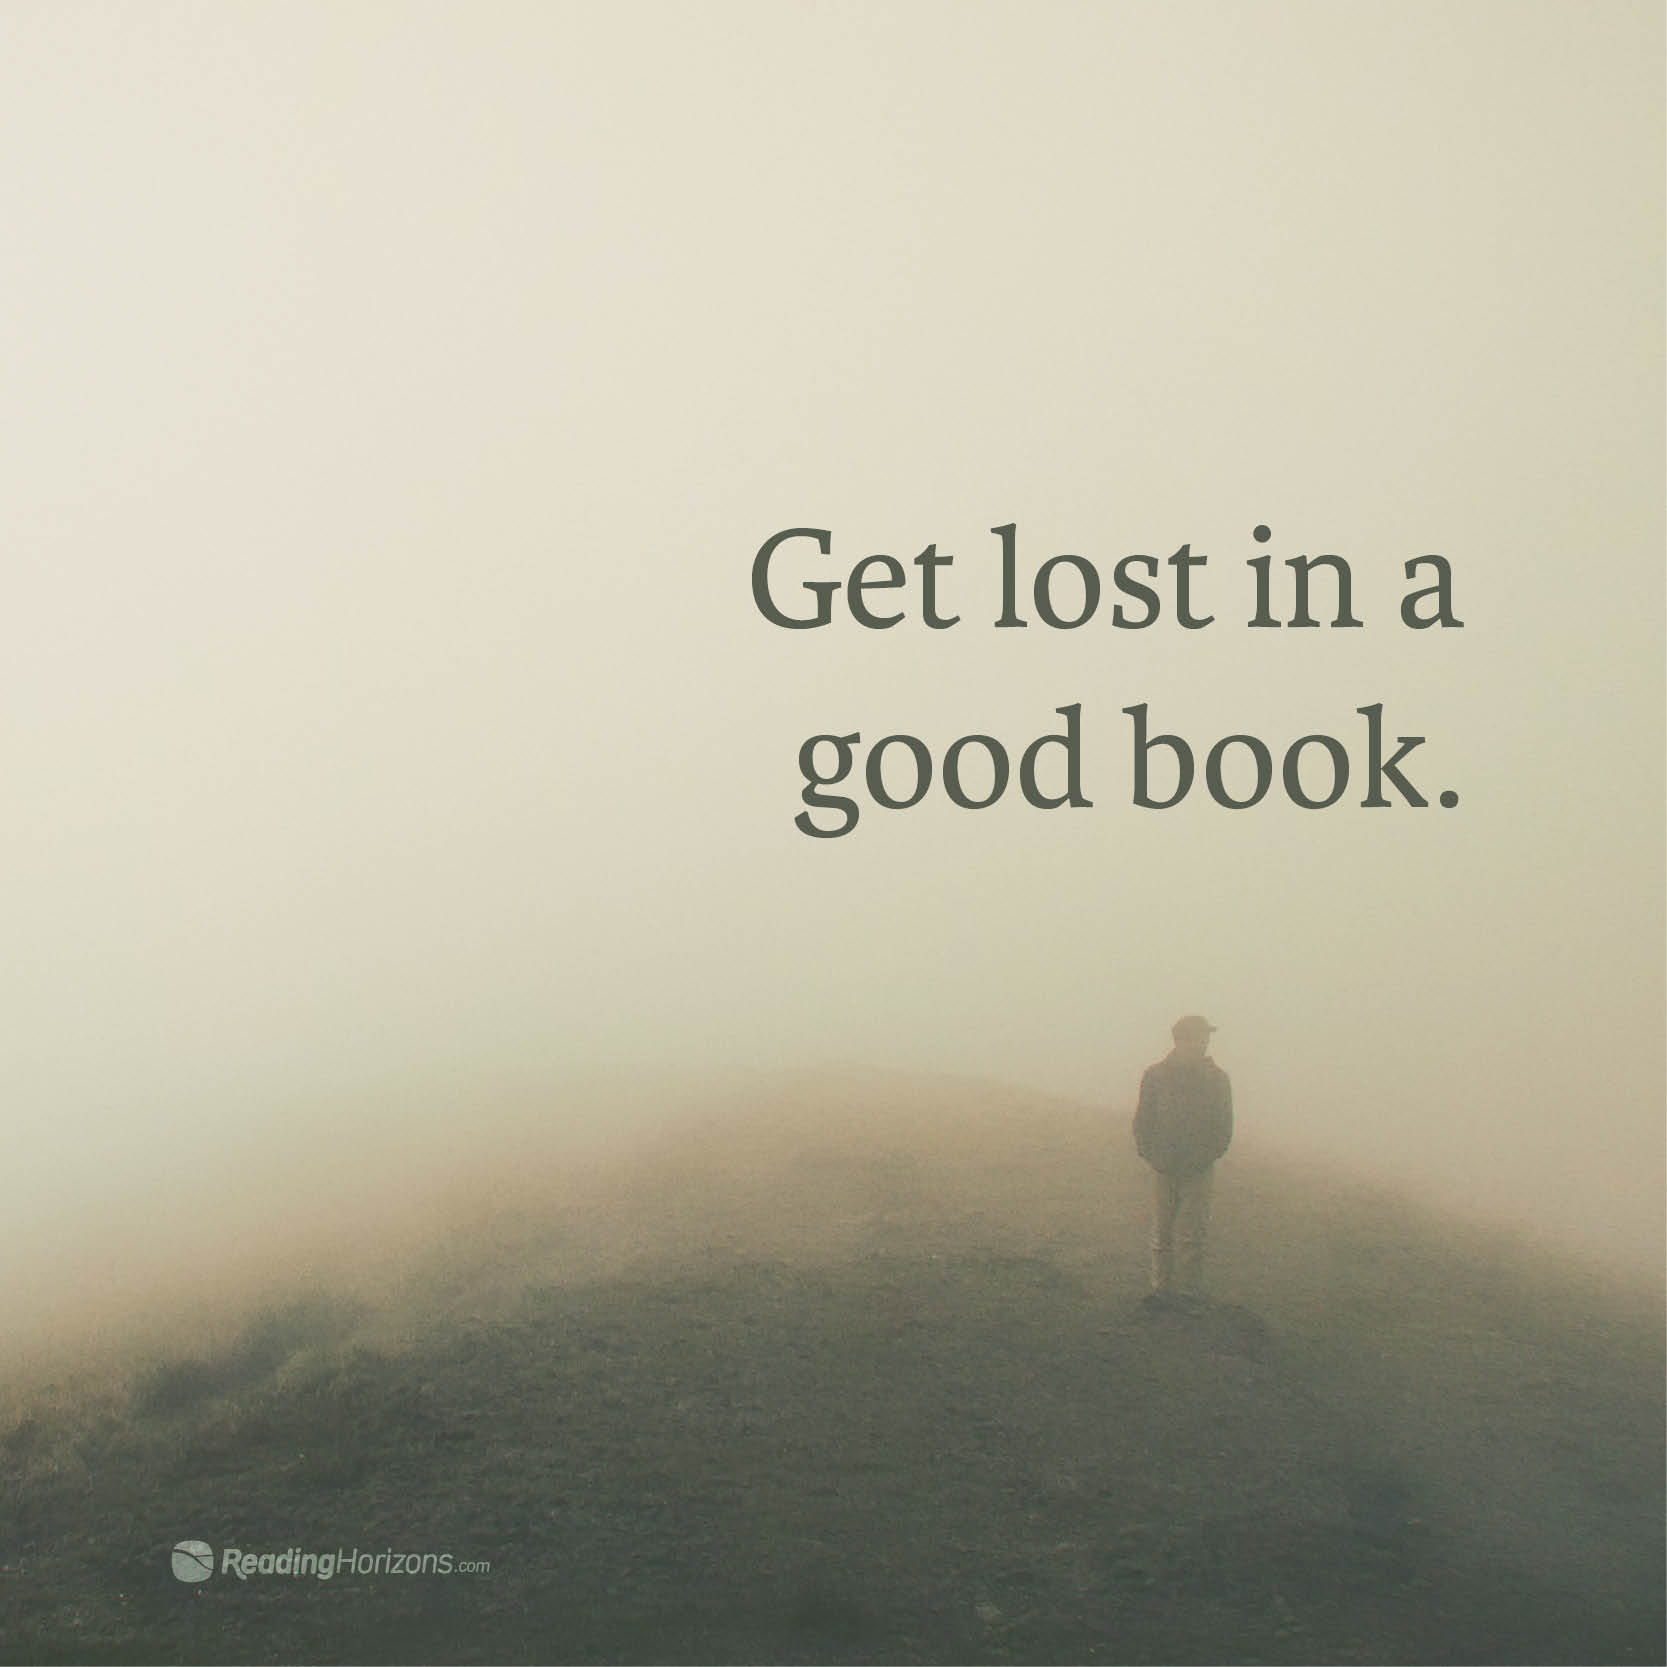 A meme of a man standing in a foggy field with the words "Get lost in a good book."